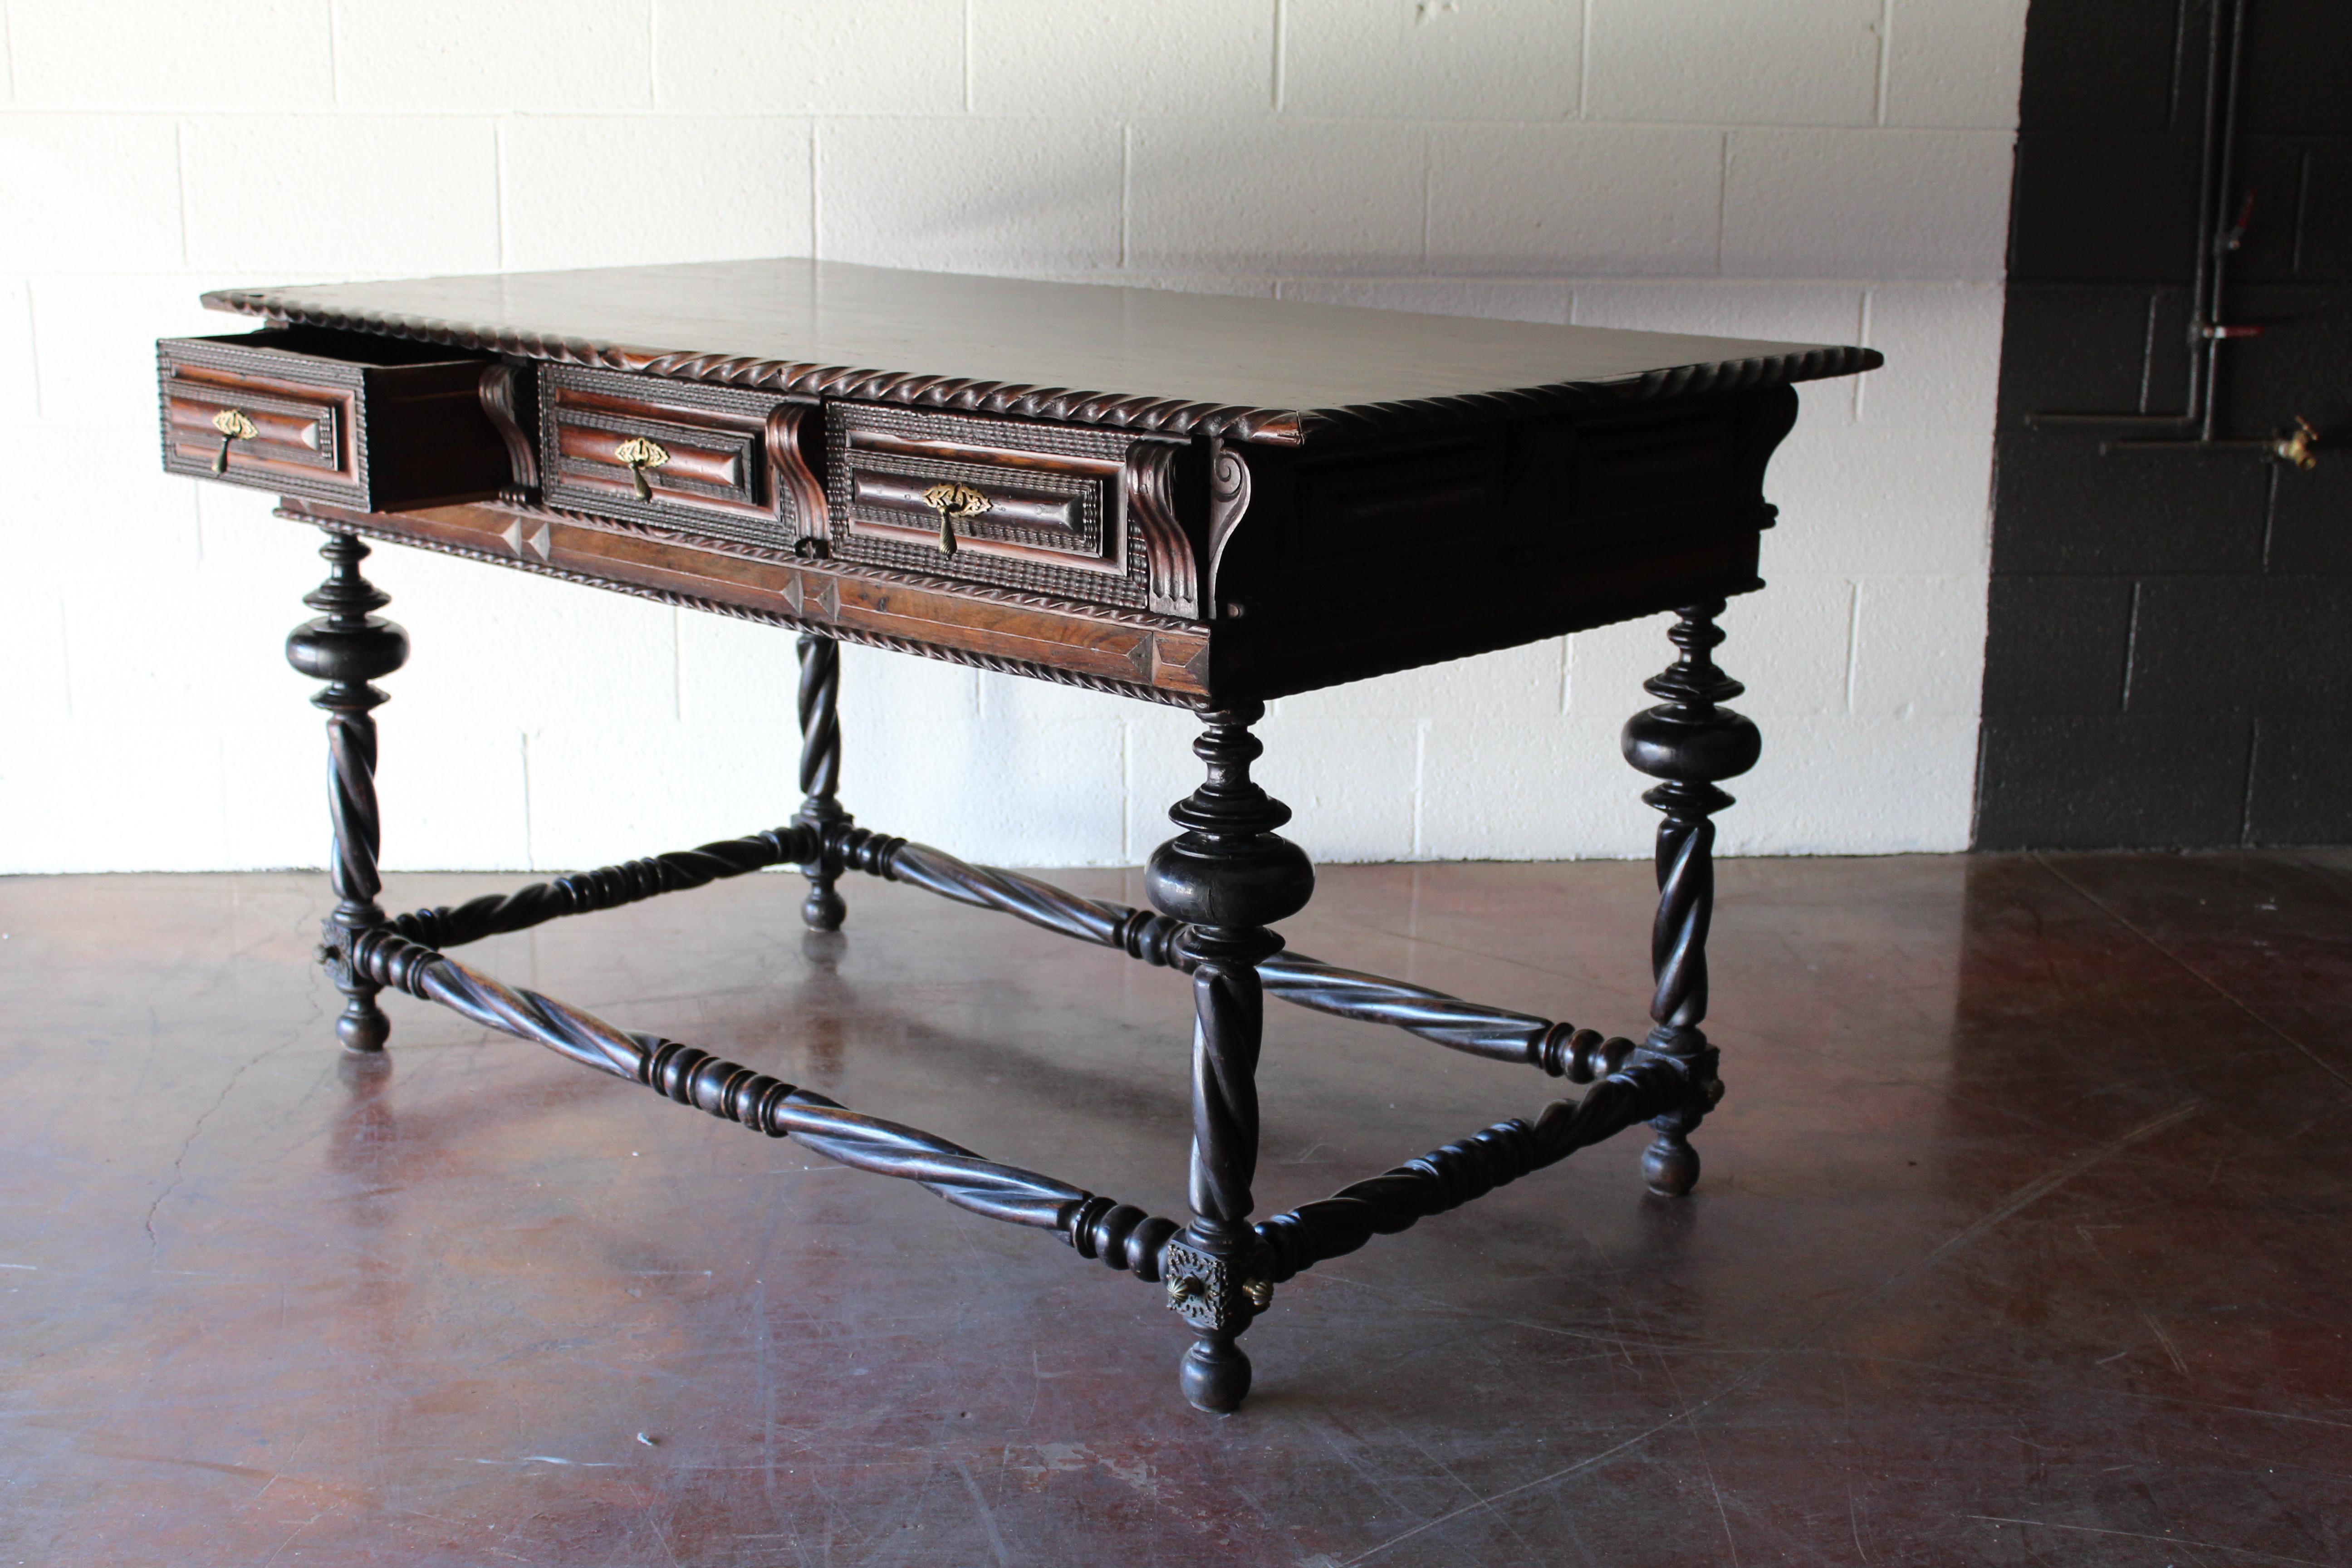 18th century Portuguese library table, with three drawers. Intricately carved walnut with bronze hardware and corner details.